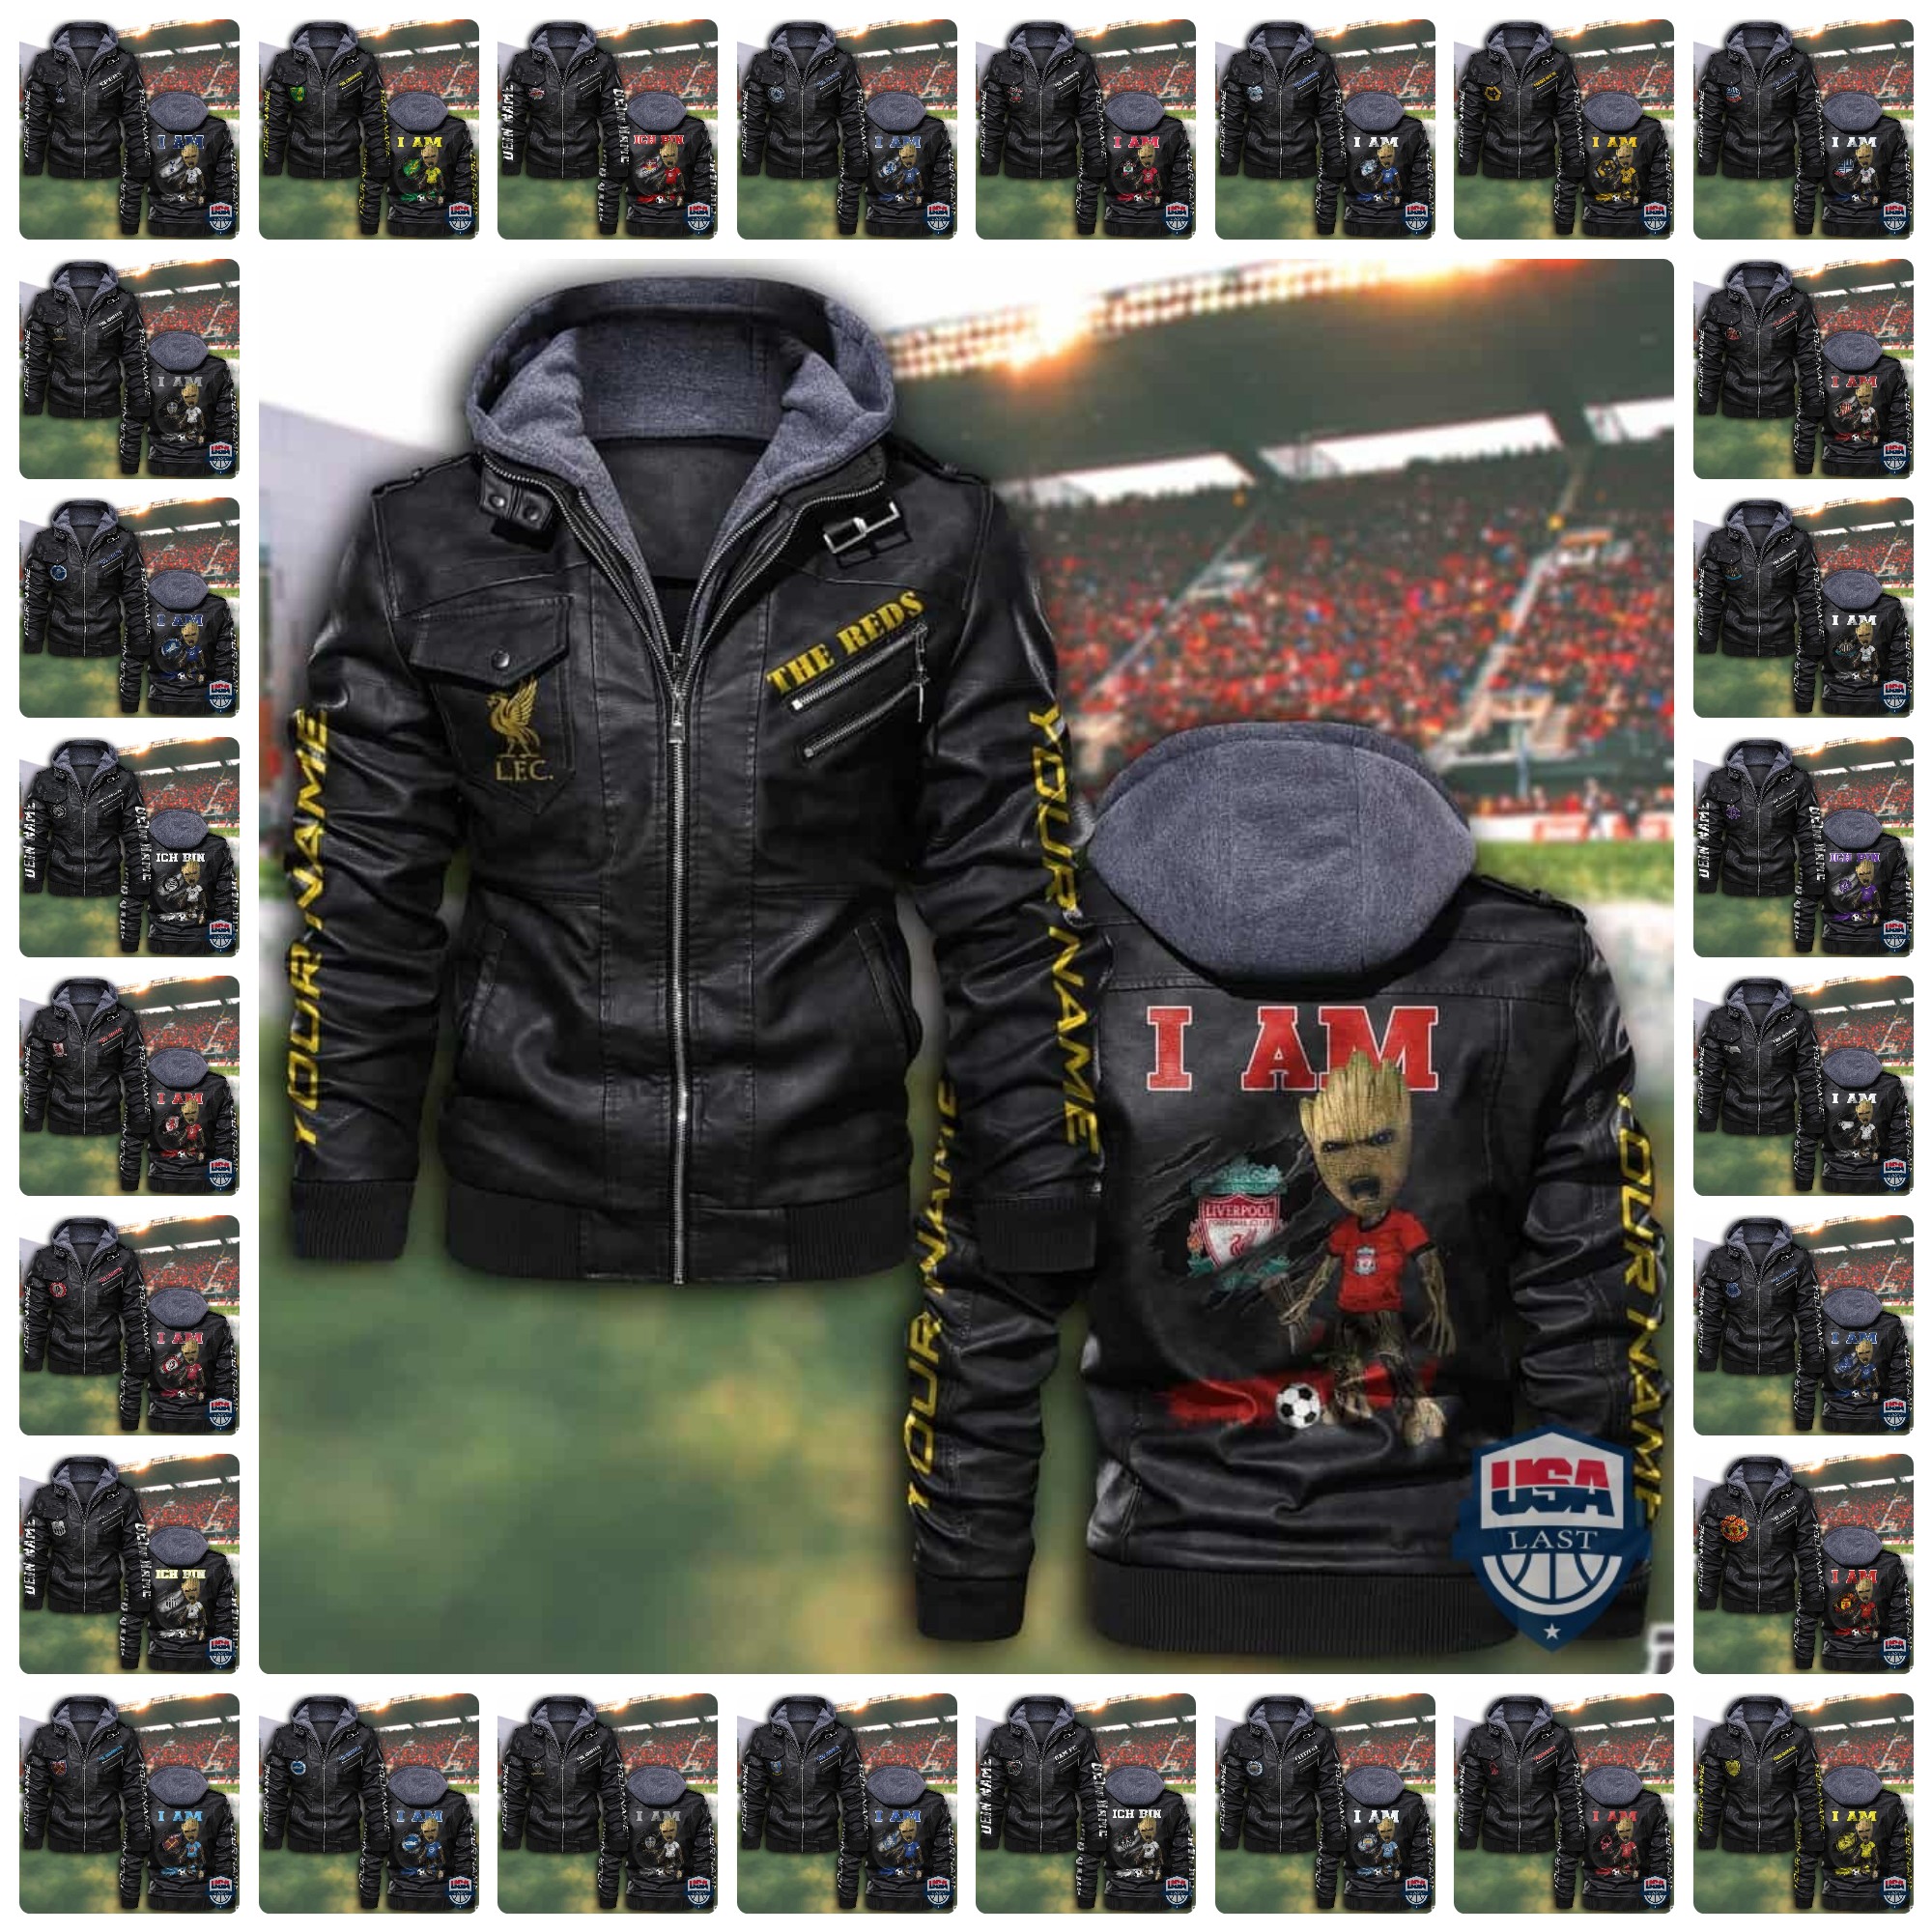 Men's Leather Jackets With Football Clubs Logo